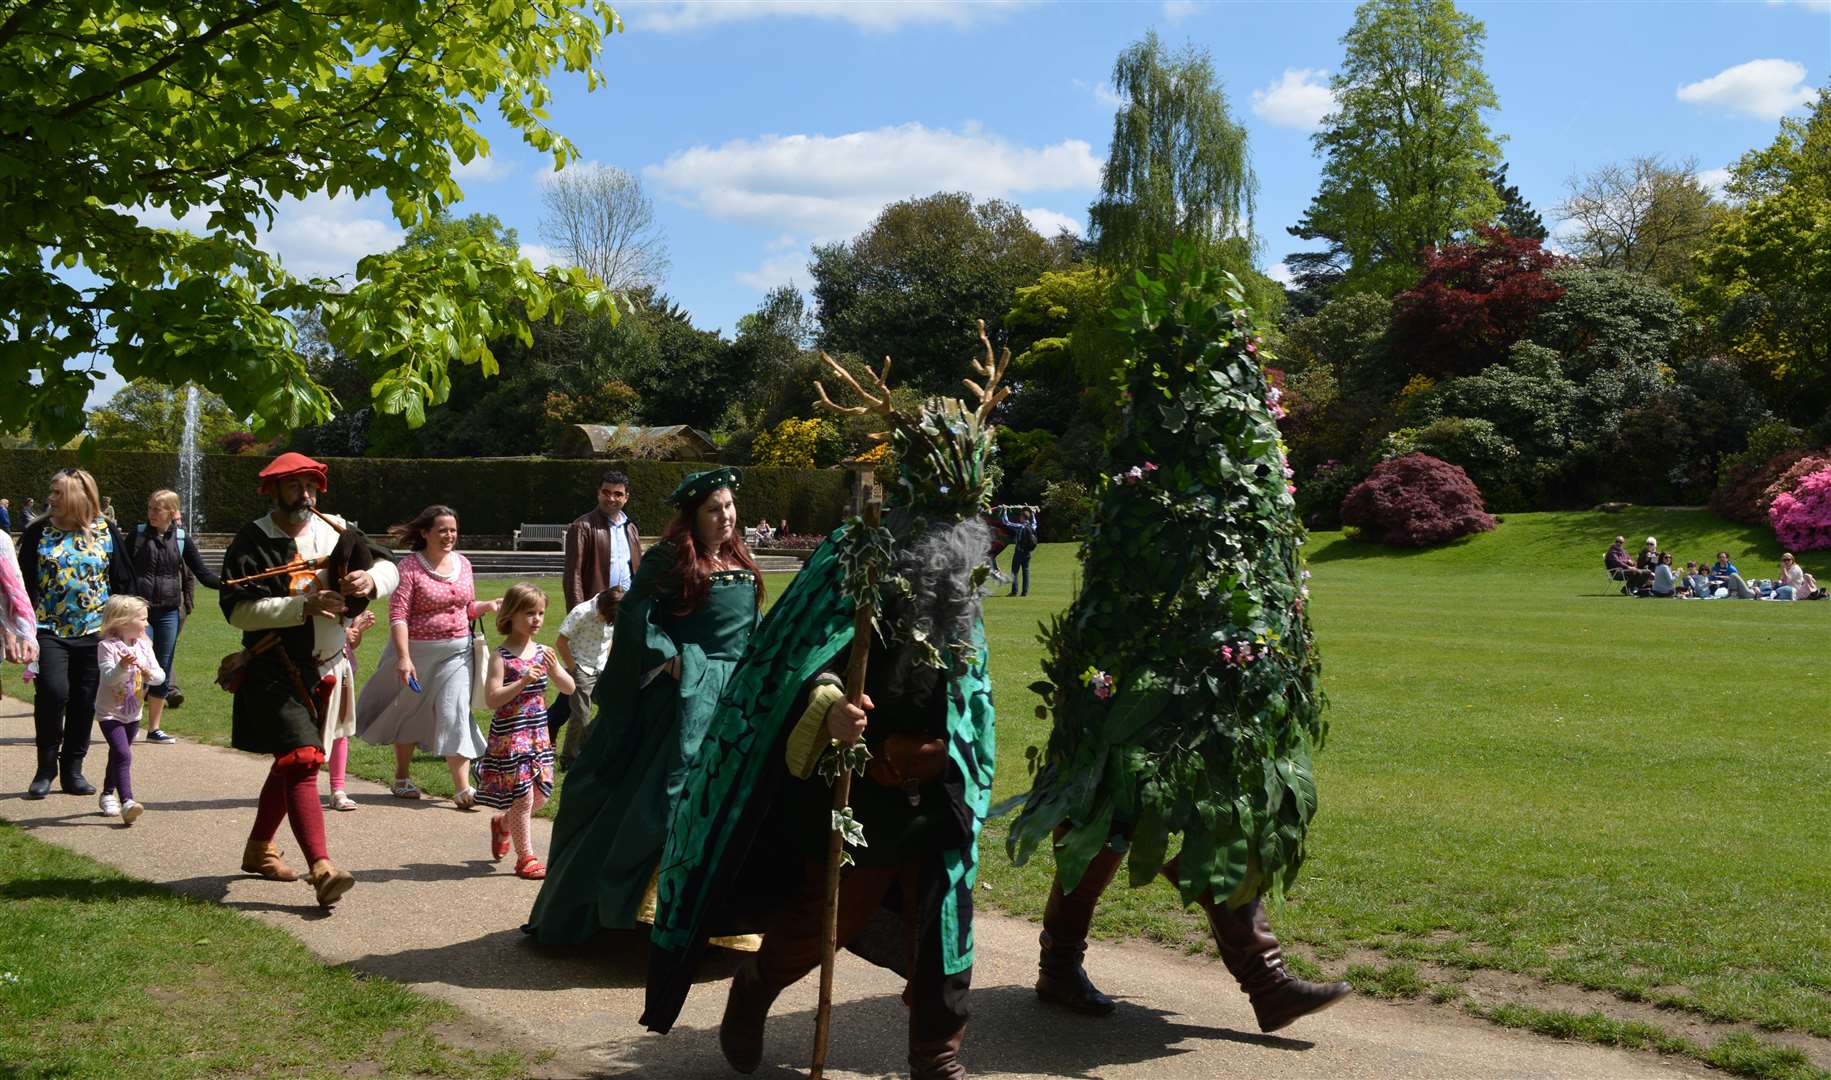 May day at Hever Castle with the Jack in the Green